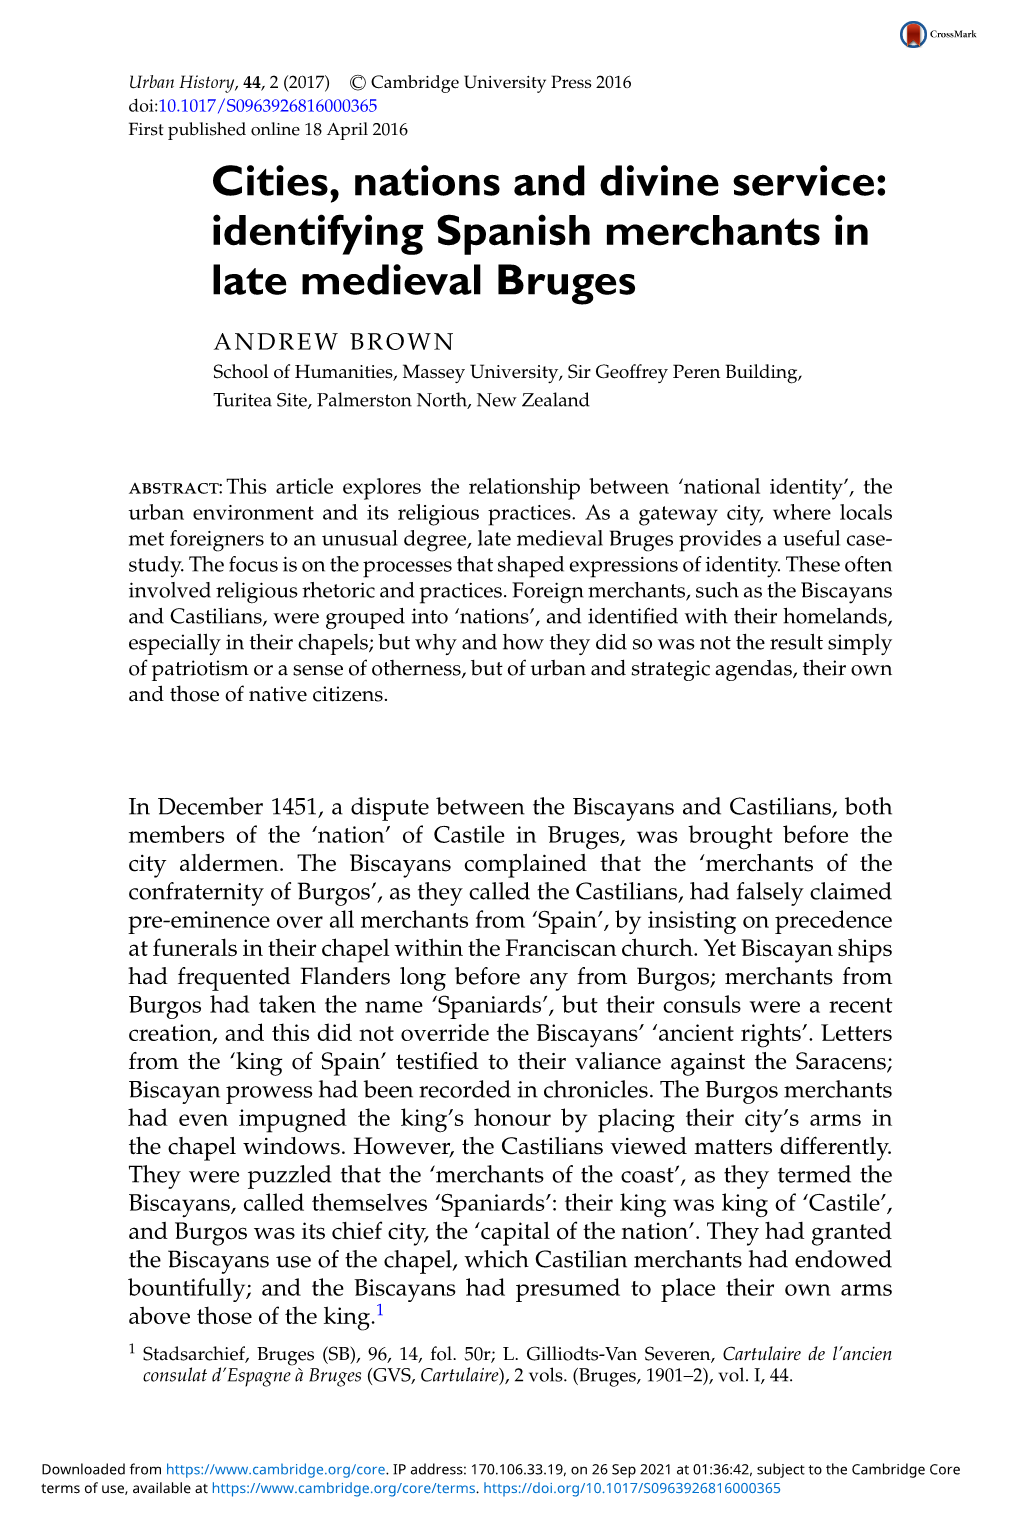 Cities, Nations and Divine Service: Identifying Spanish Merchants in Late Medieval Bruges